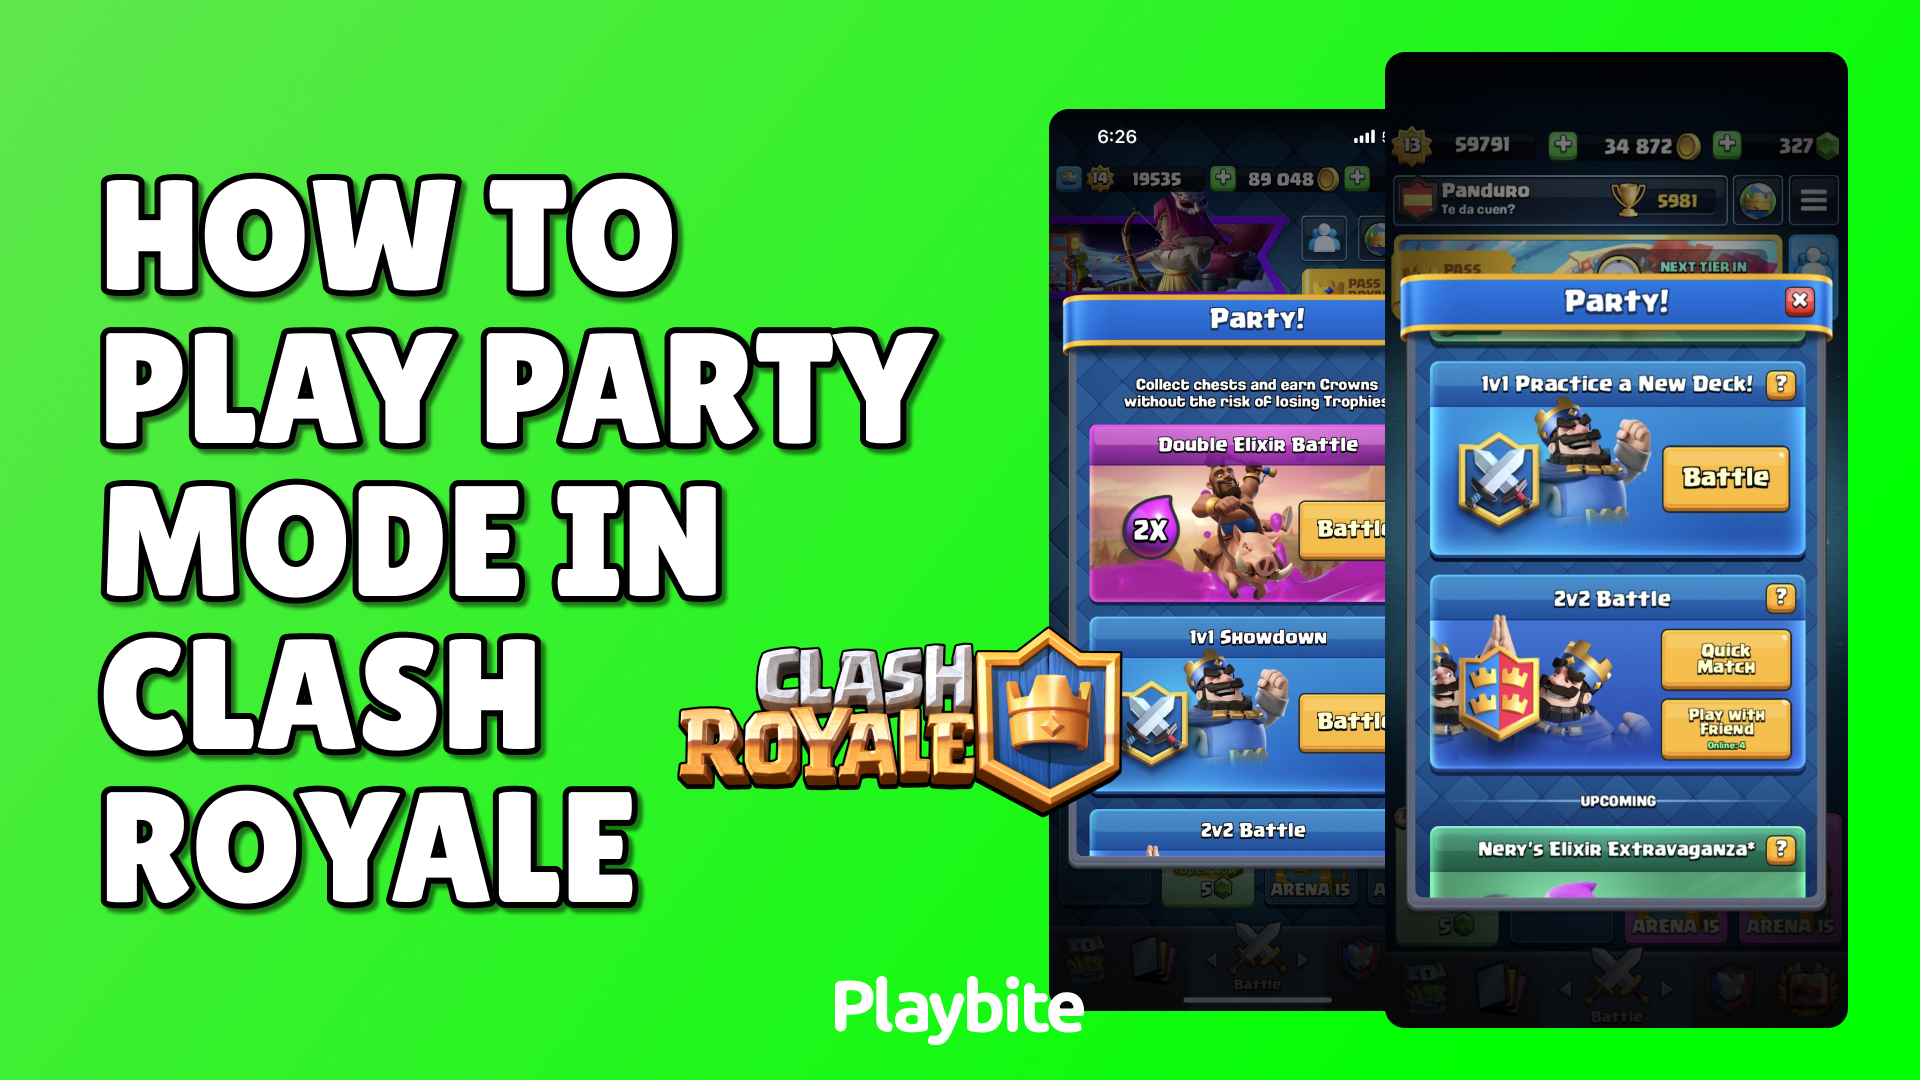 How To Play Party Mode In Clash Royale